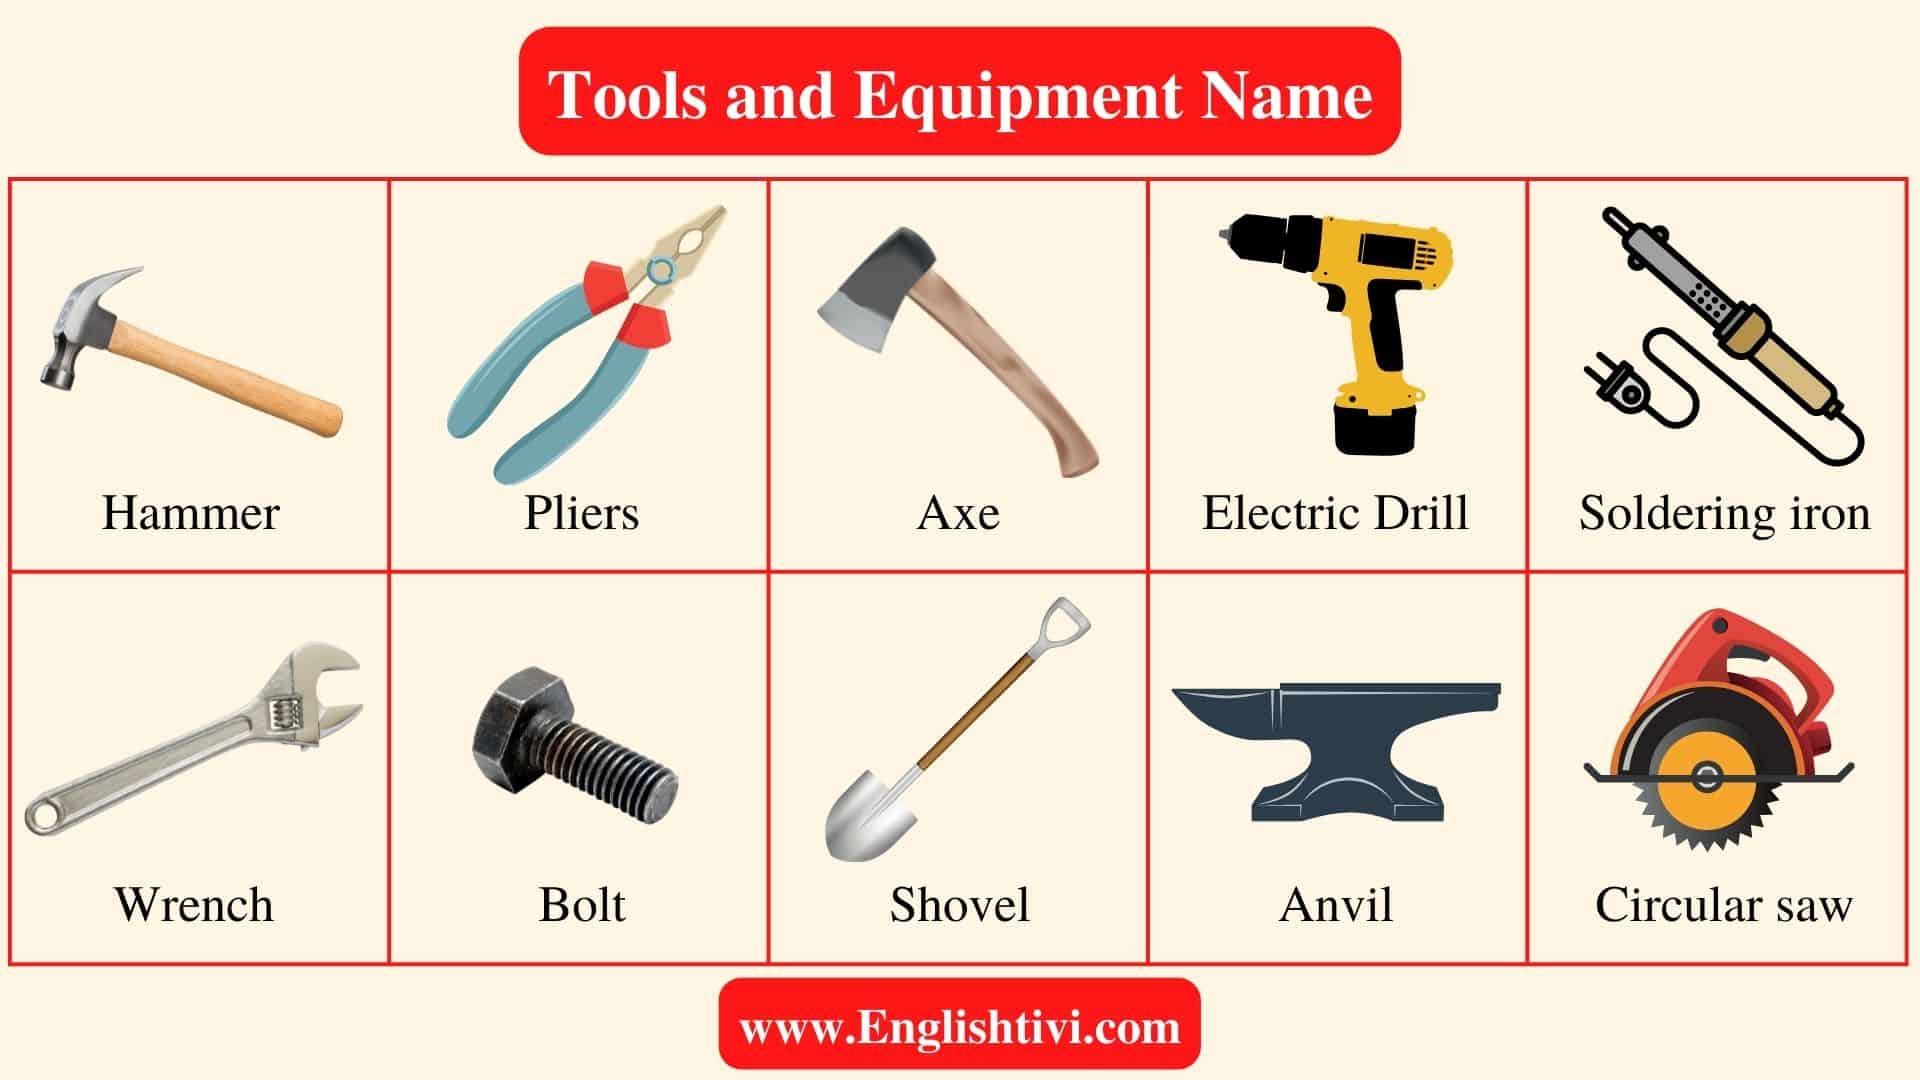 Basic Woodworking vs. Metalworking Tools - Empire Abrasives